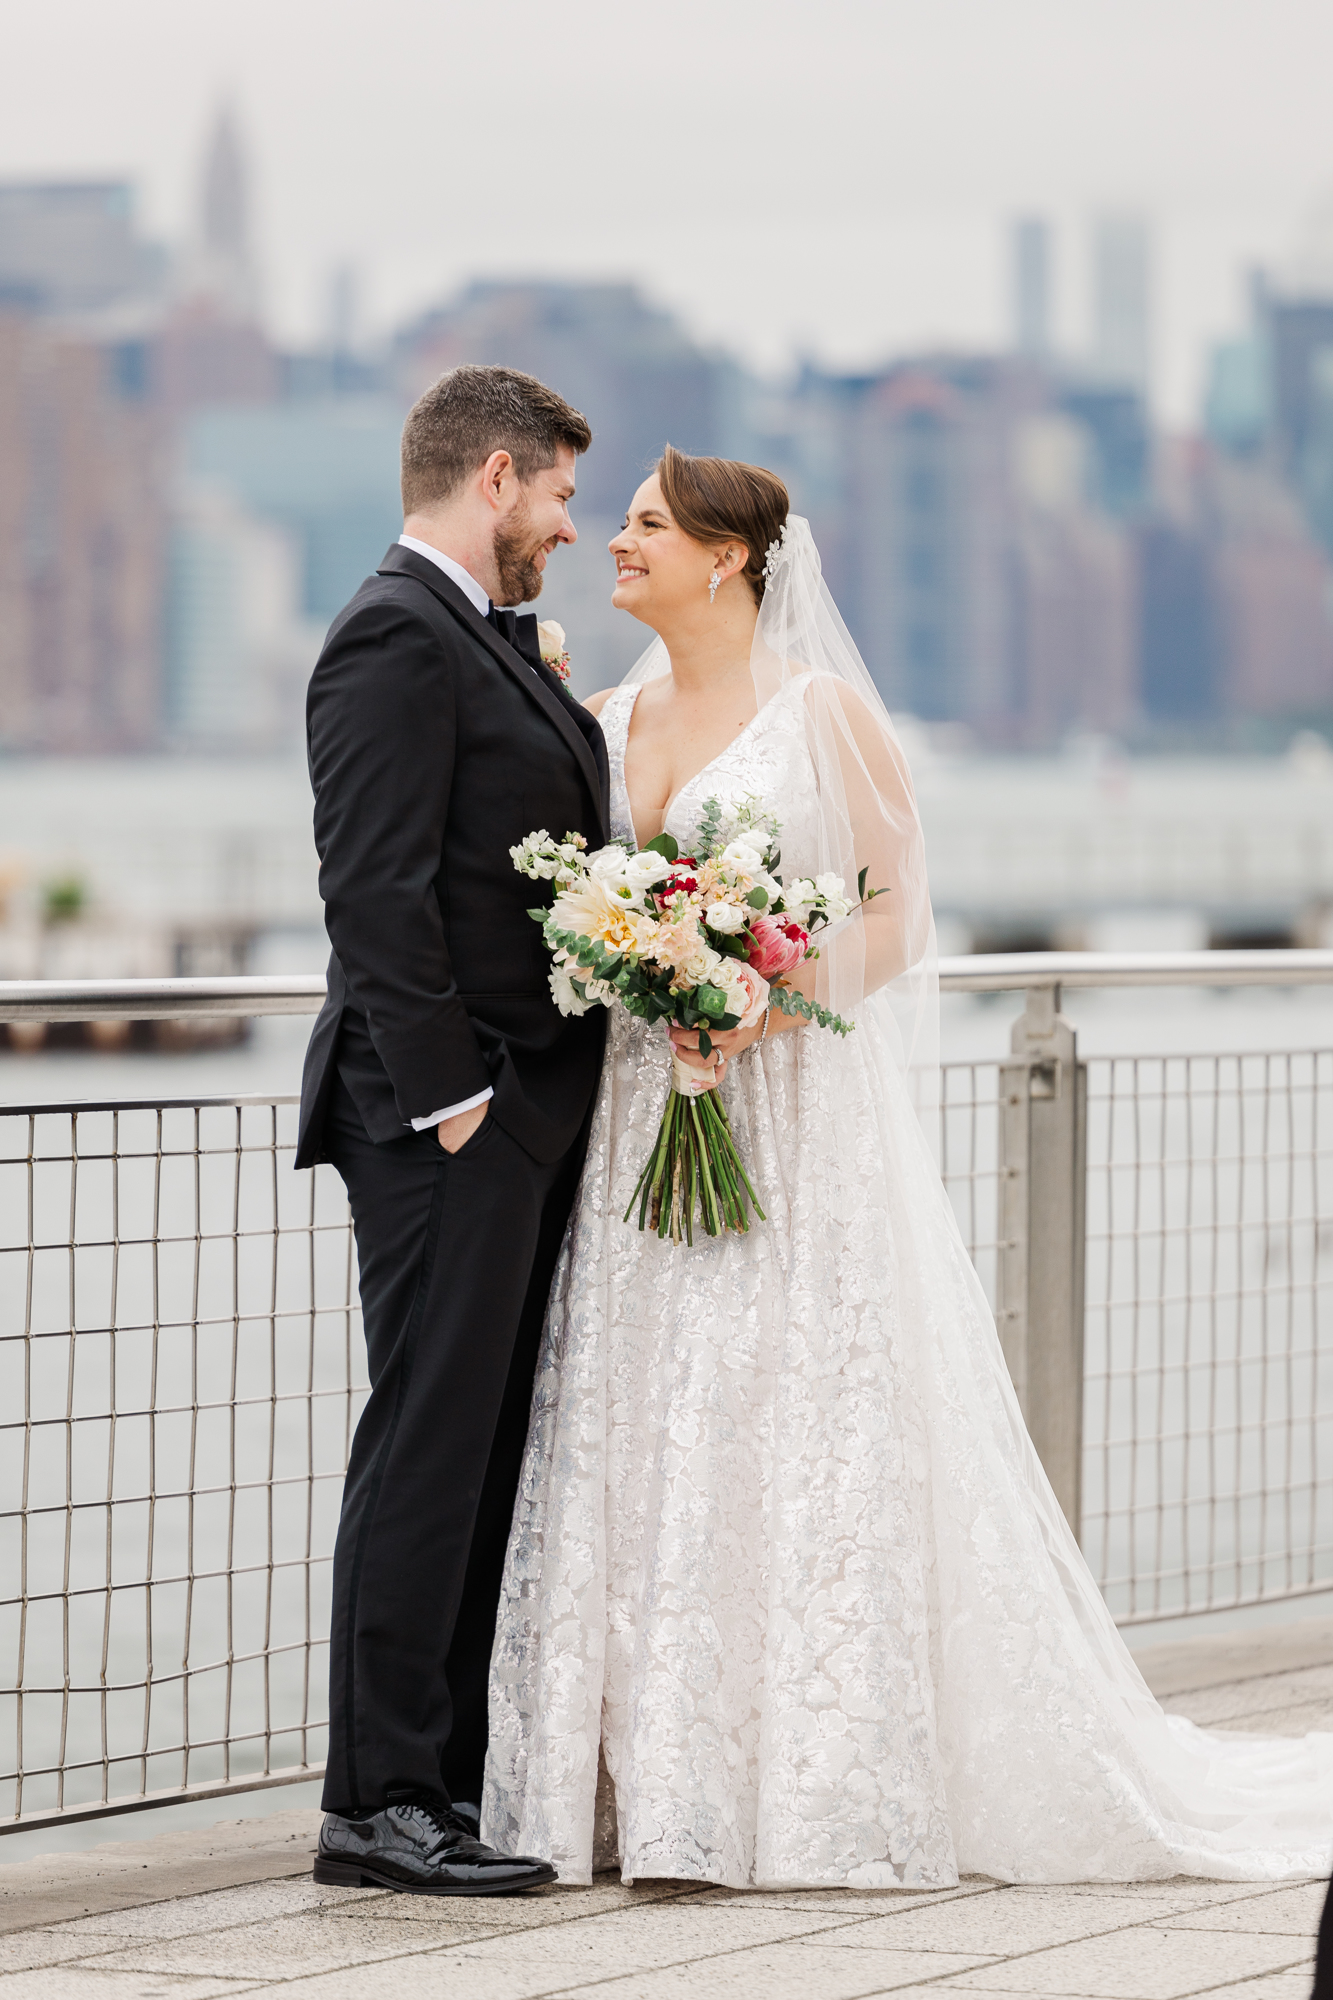 Playful New York Wedding at Giando On The Water